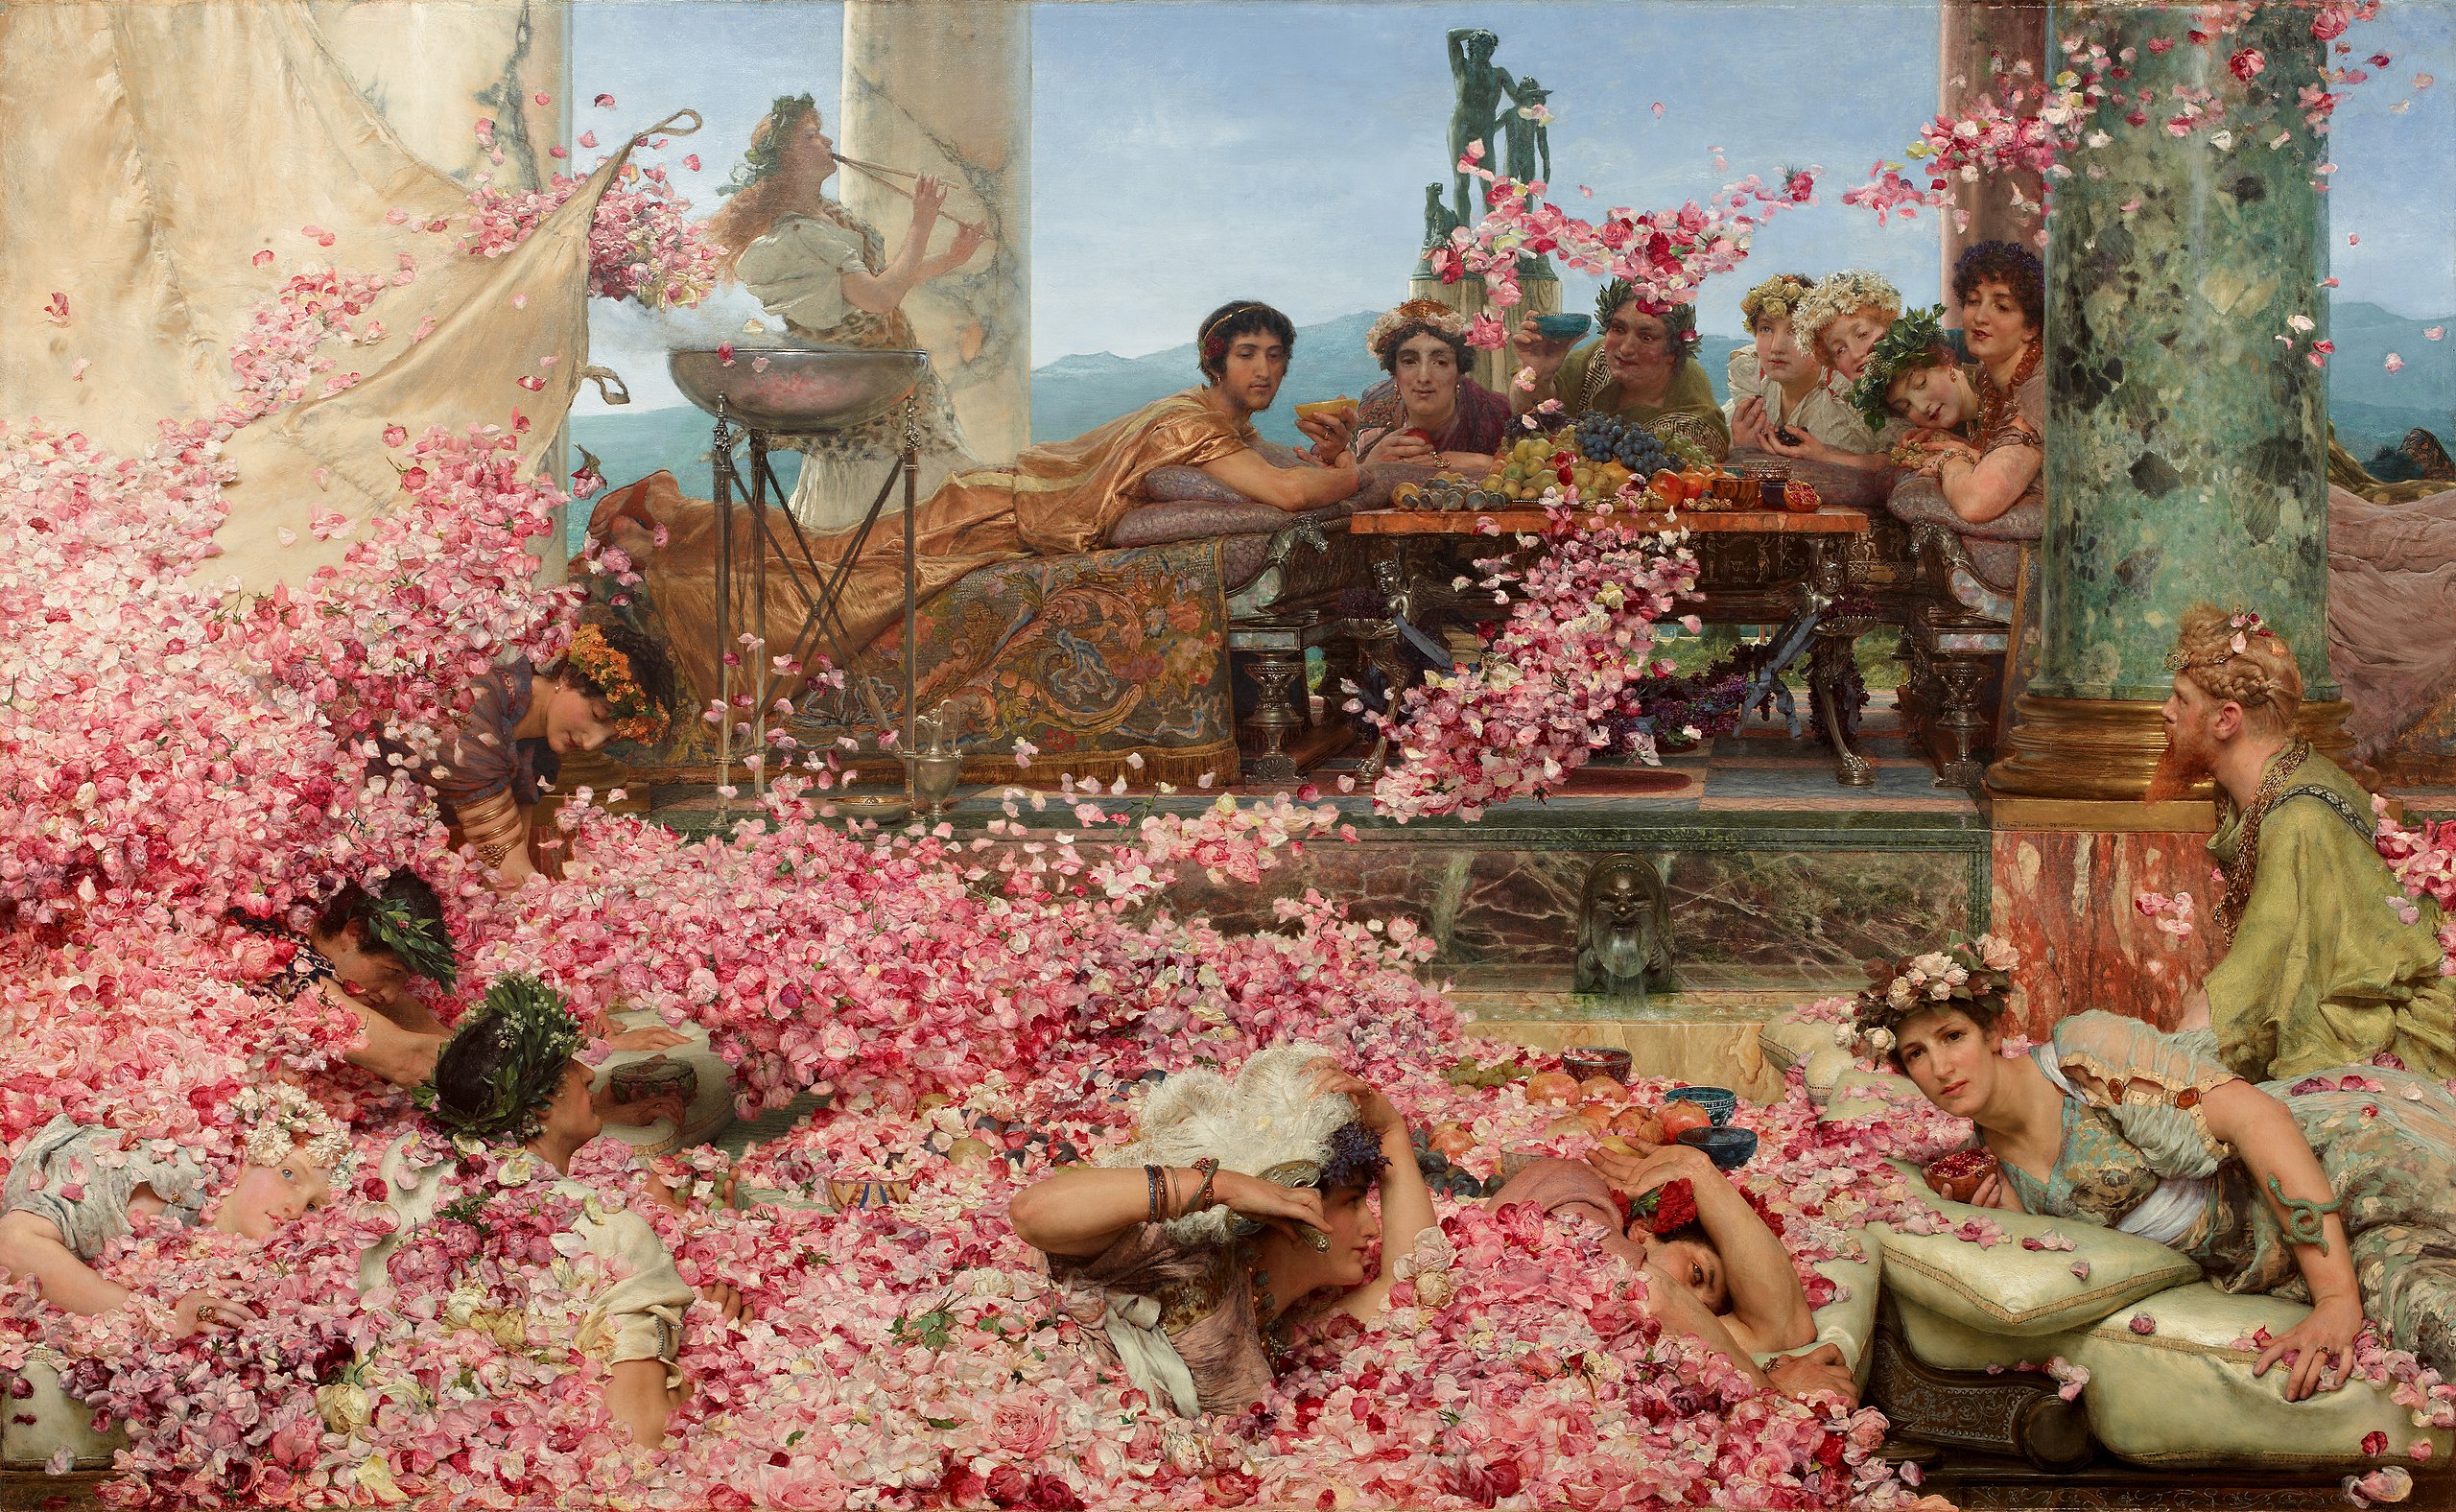 A realistic and vivid painting with Elagabalus laying on a table with others watching as tons of flower pedals cover her guests.